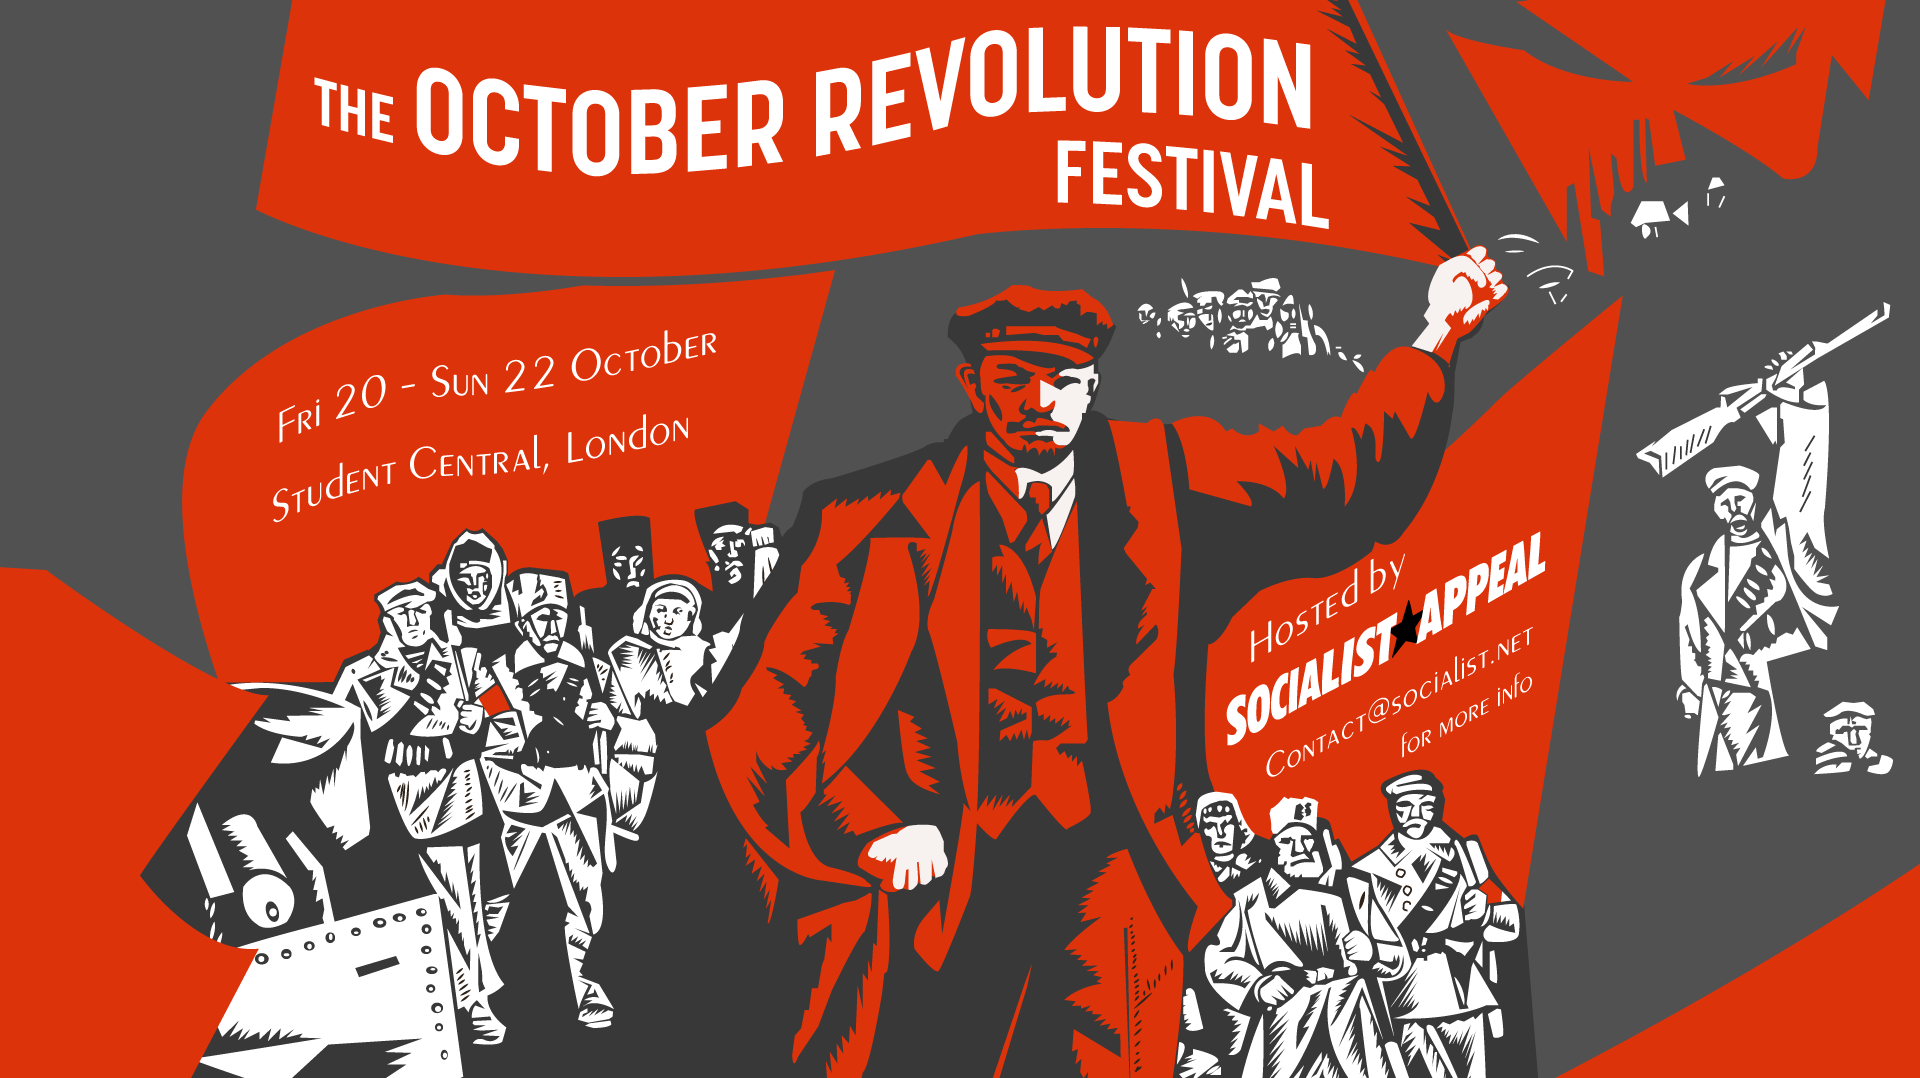 October Revolution festival starts in one week – book now!